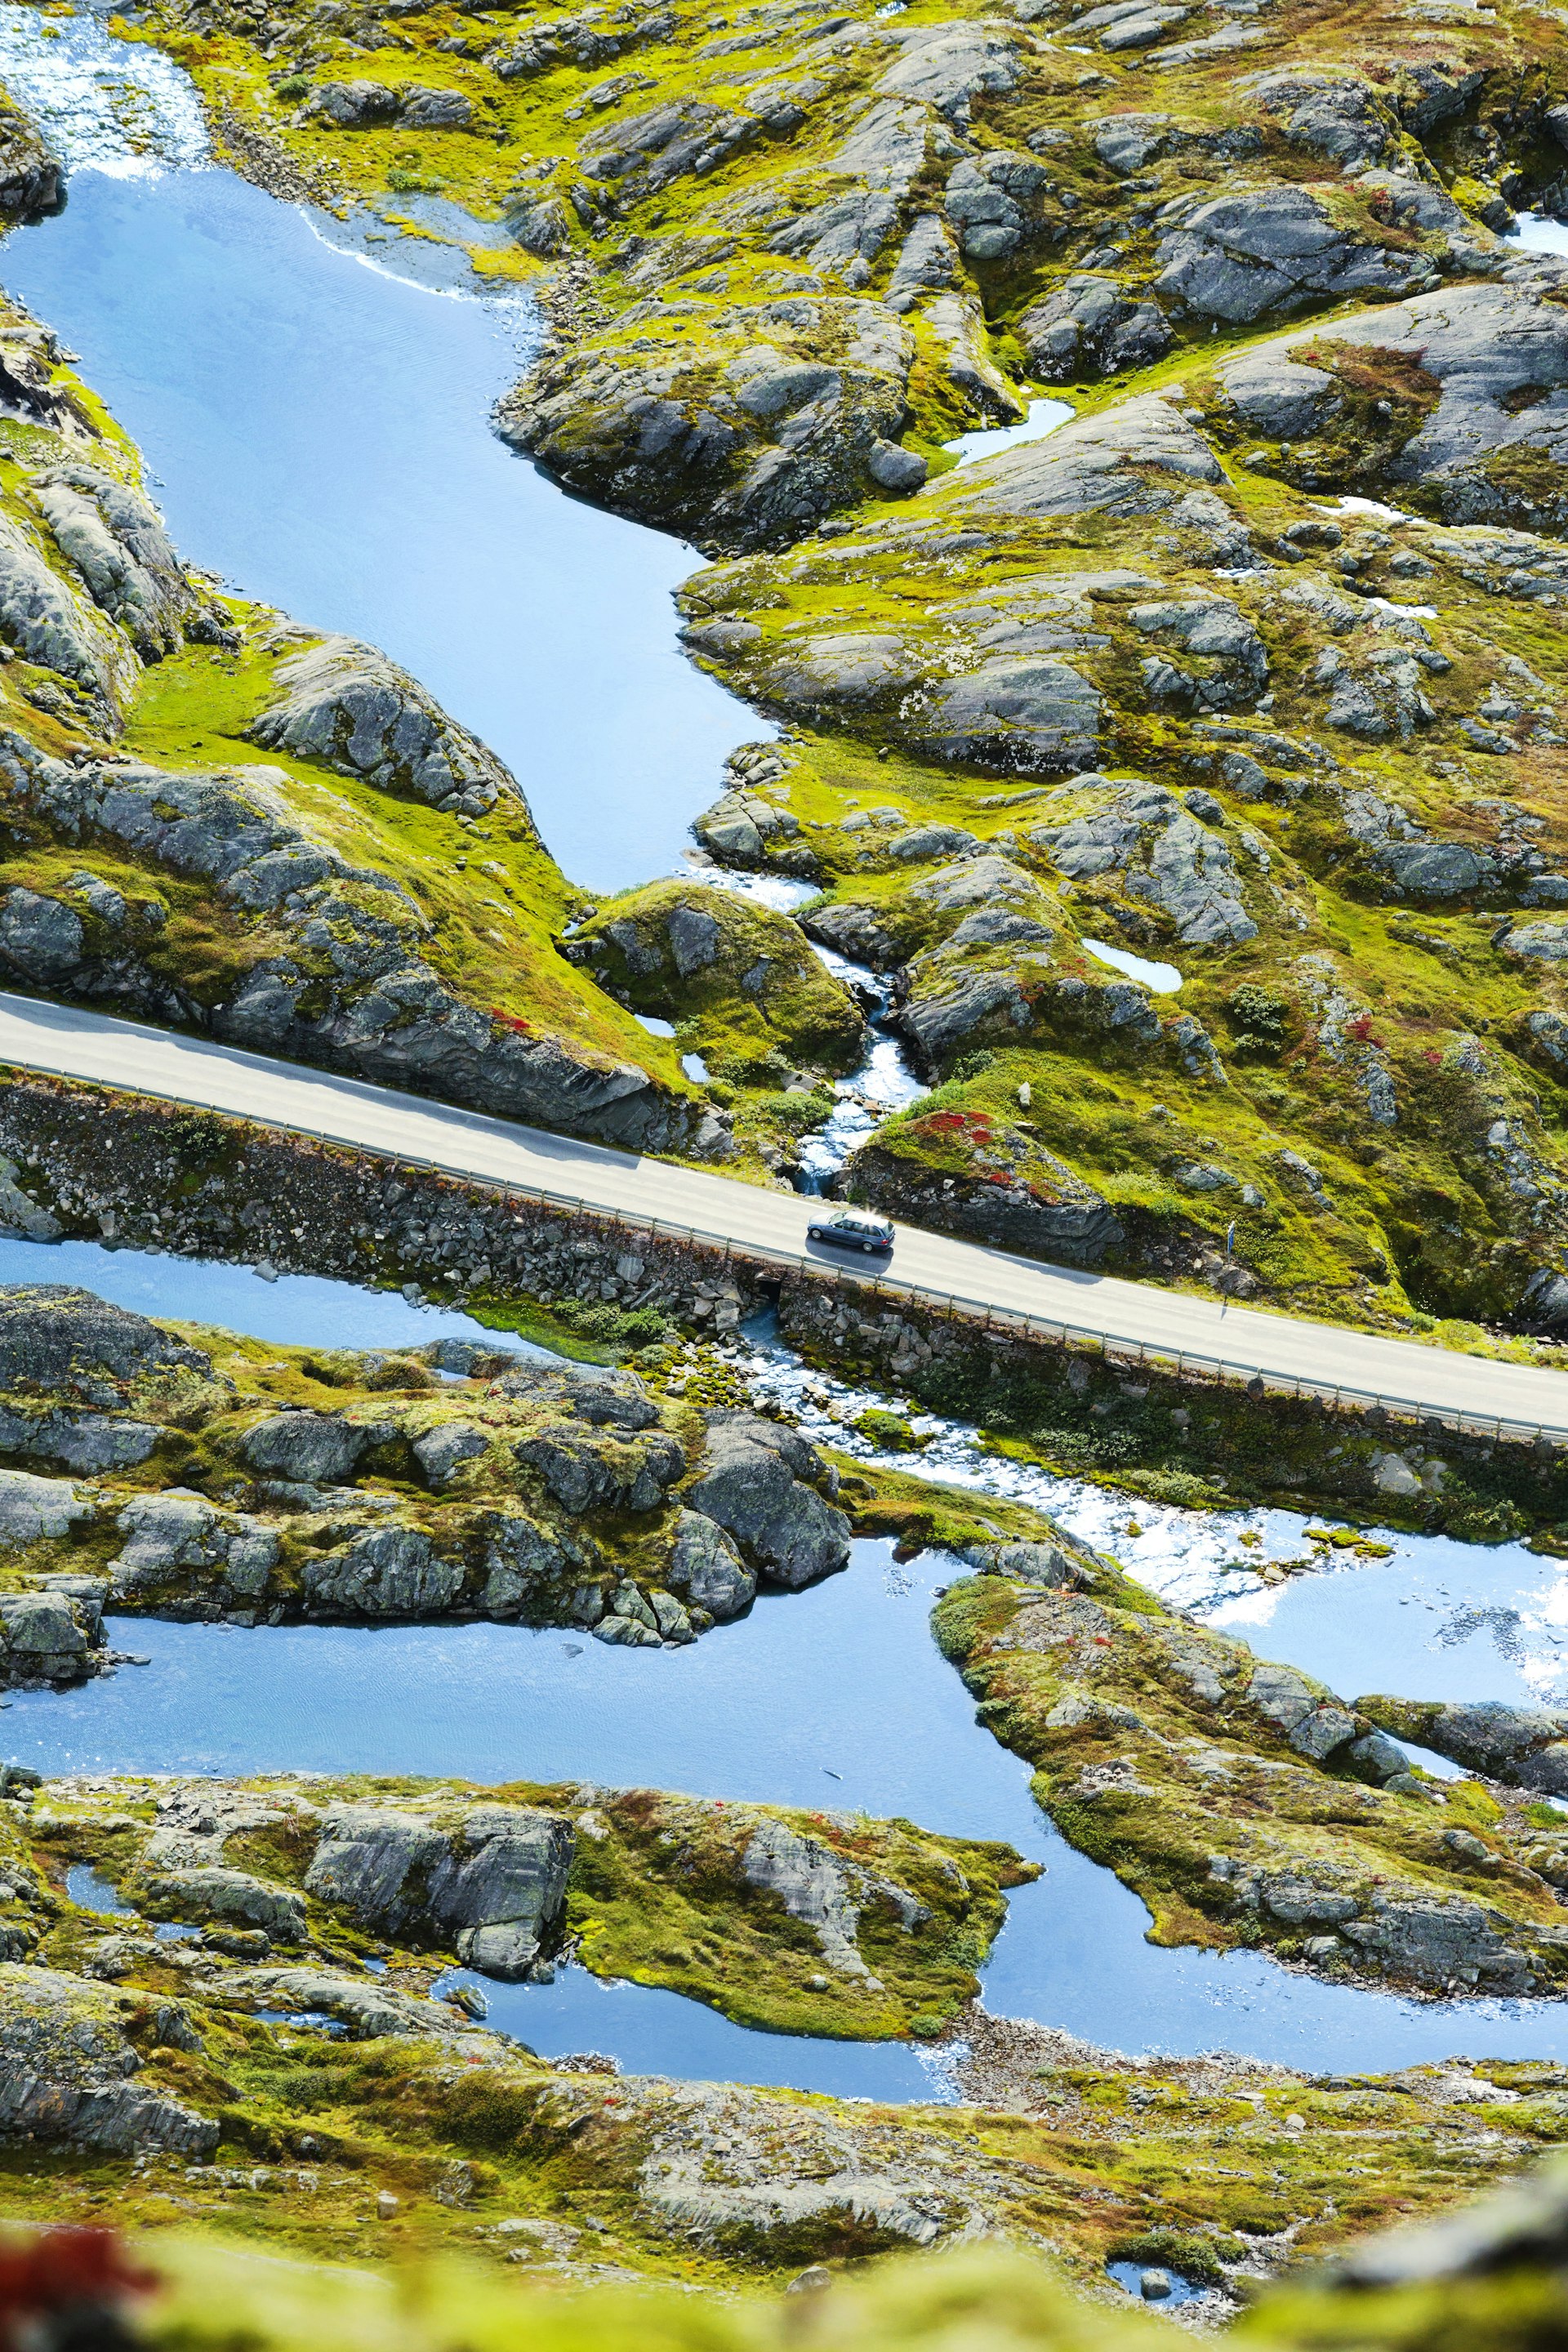 Elevated view of a lone car driving along a road through a fjord with water and rocky outcrops on either side of the raised road